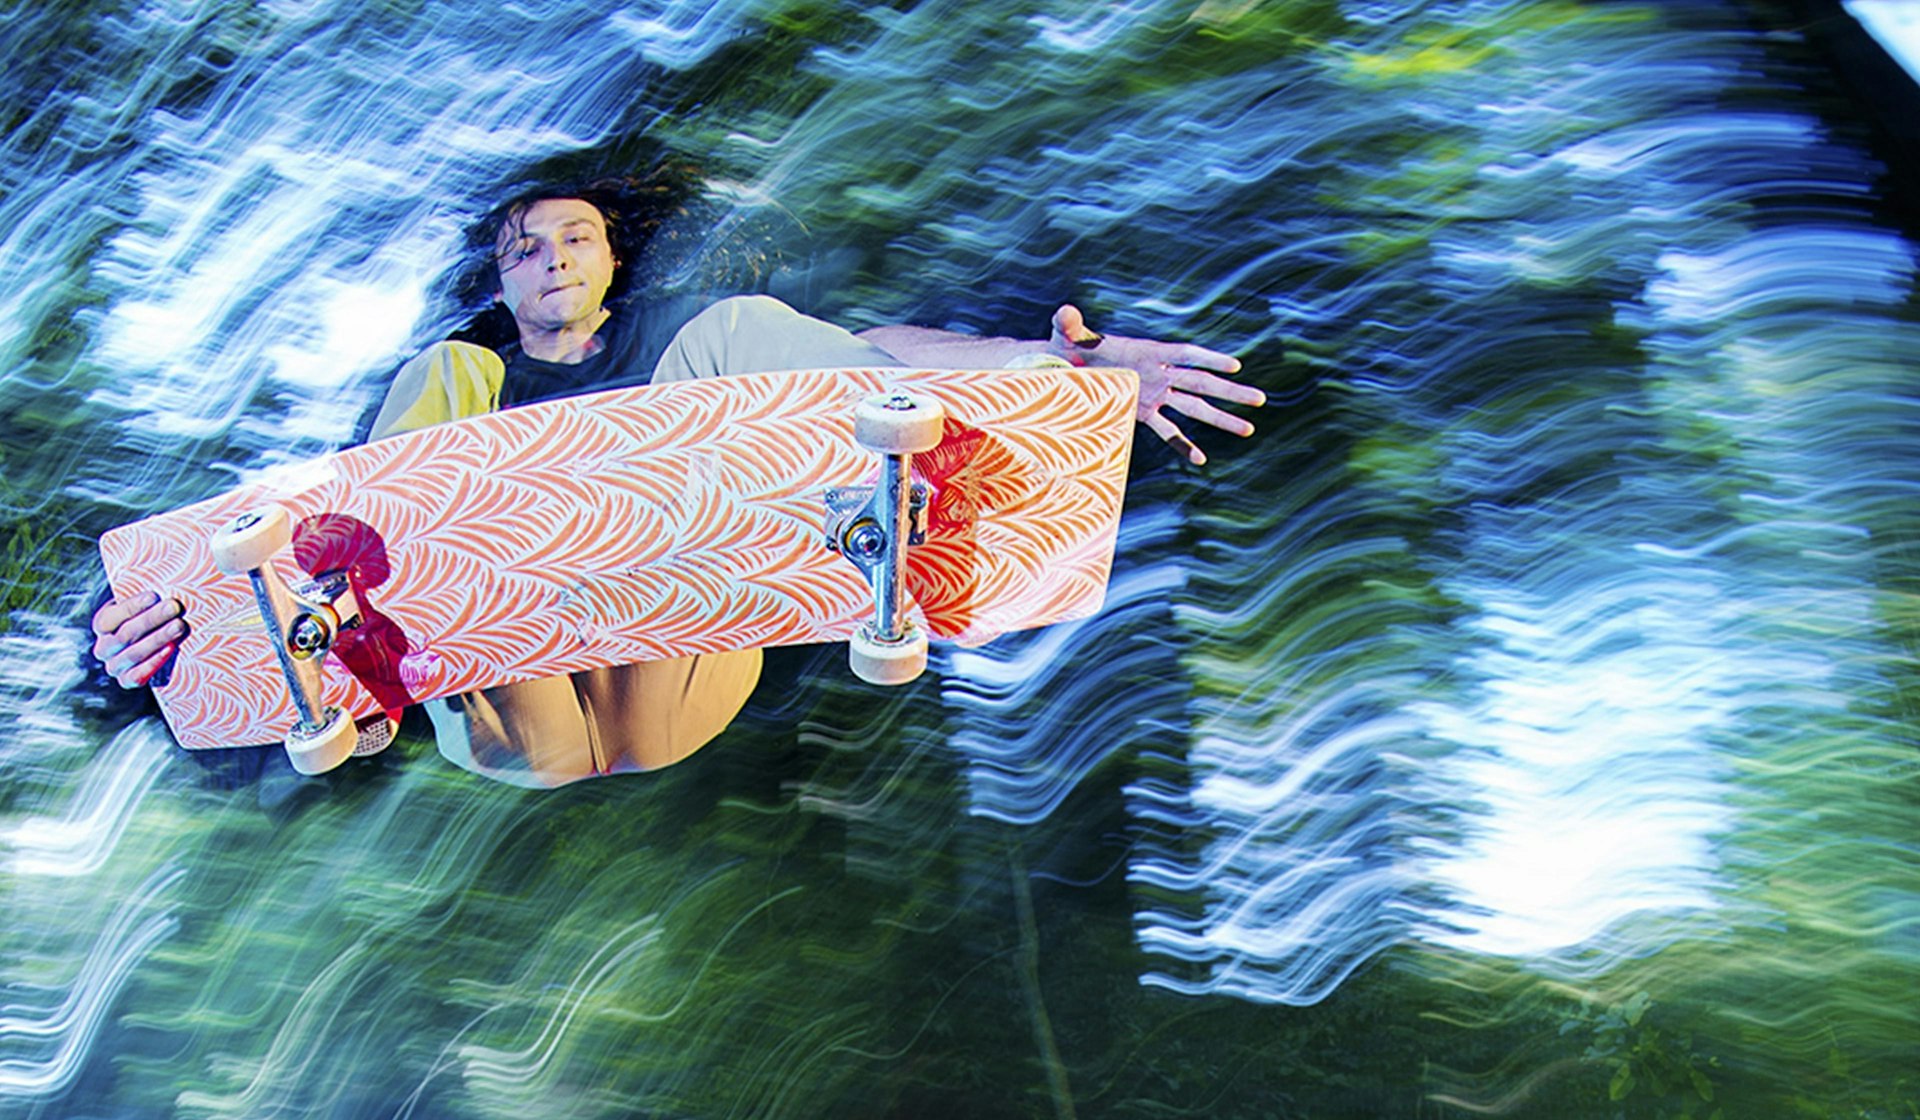 The trippy skate art of Thomas Campbell comes to life